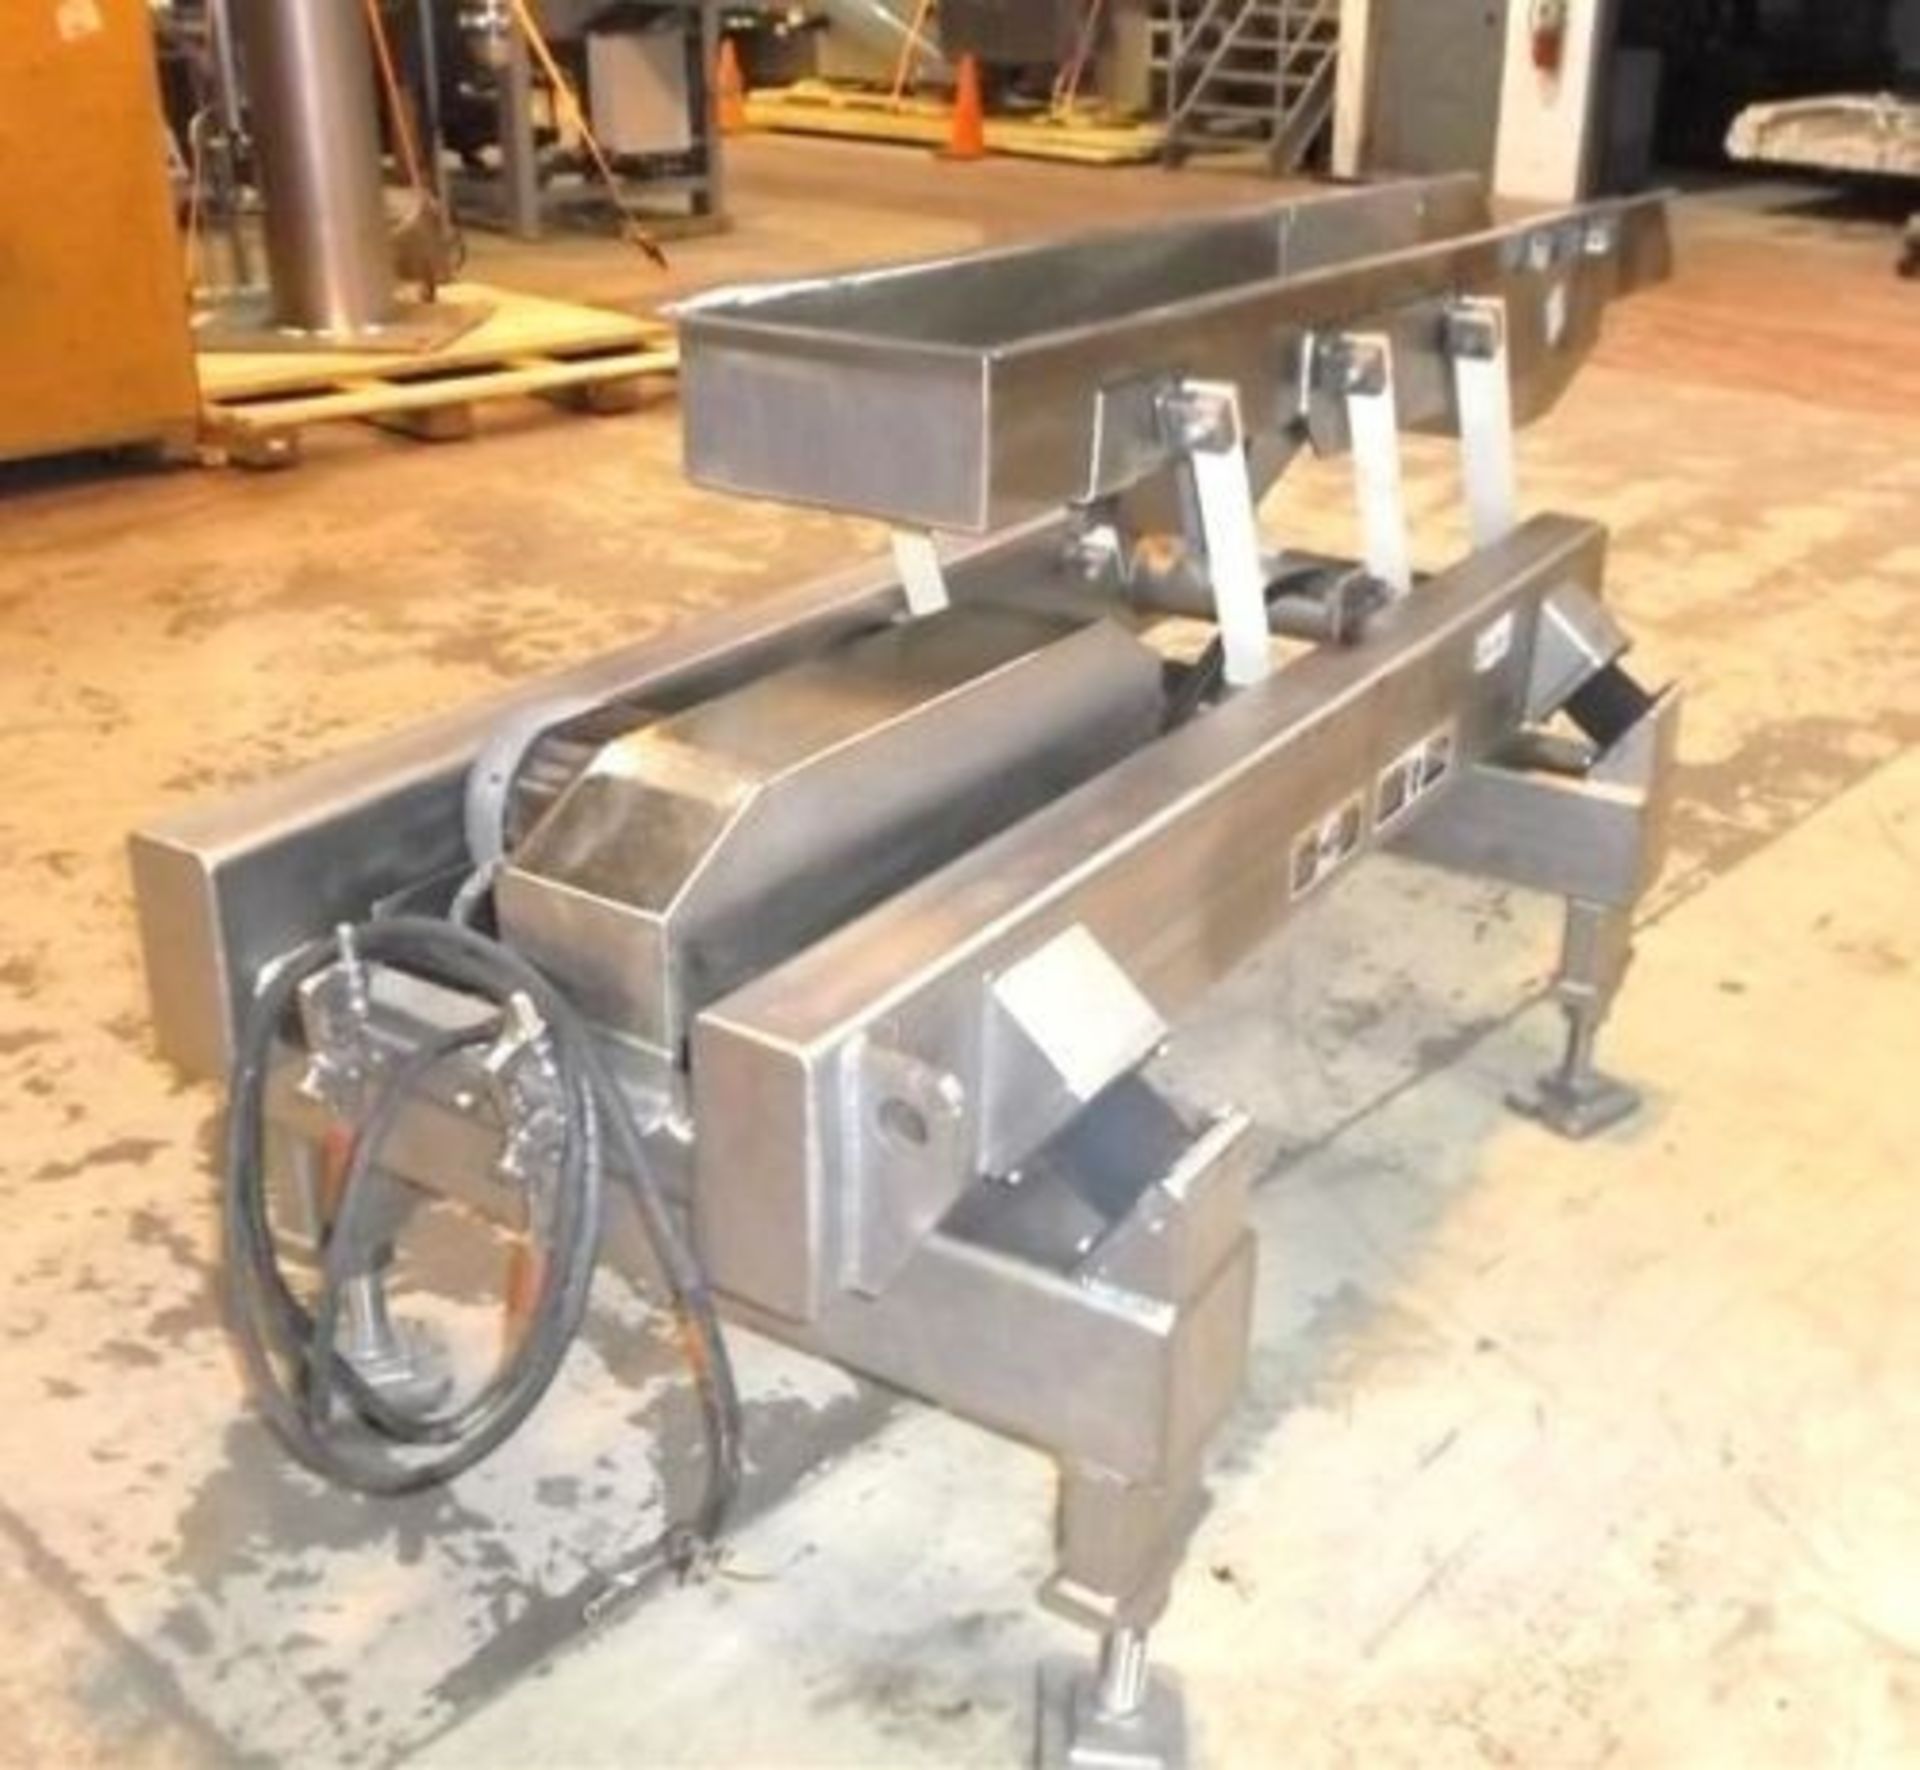 FMC Link Belt S/S Sanitary Vibratory Feeder (now owned by PPM Technologies) - Main Feed Pan 12" W - Image 5 of 6